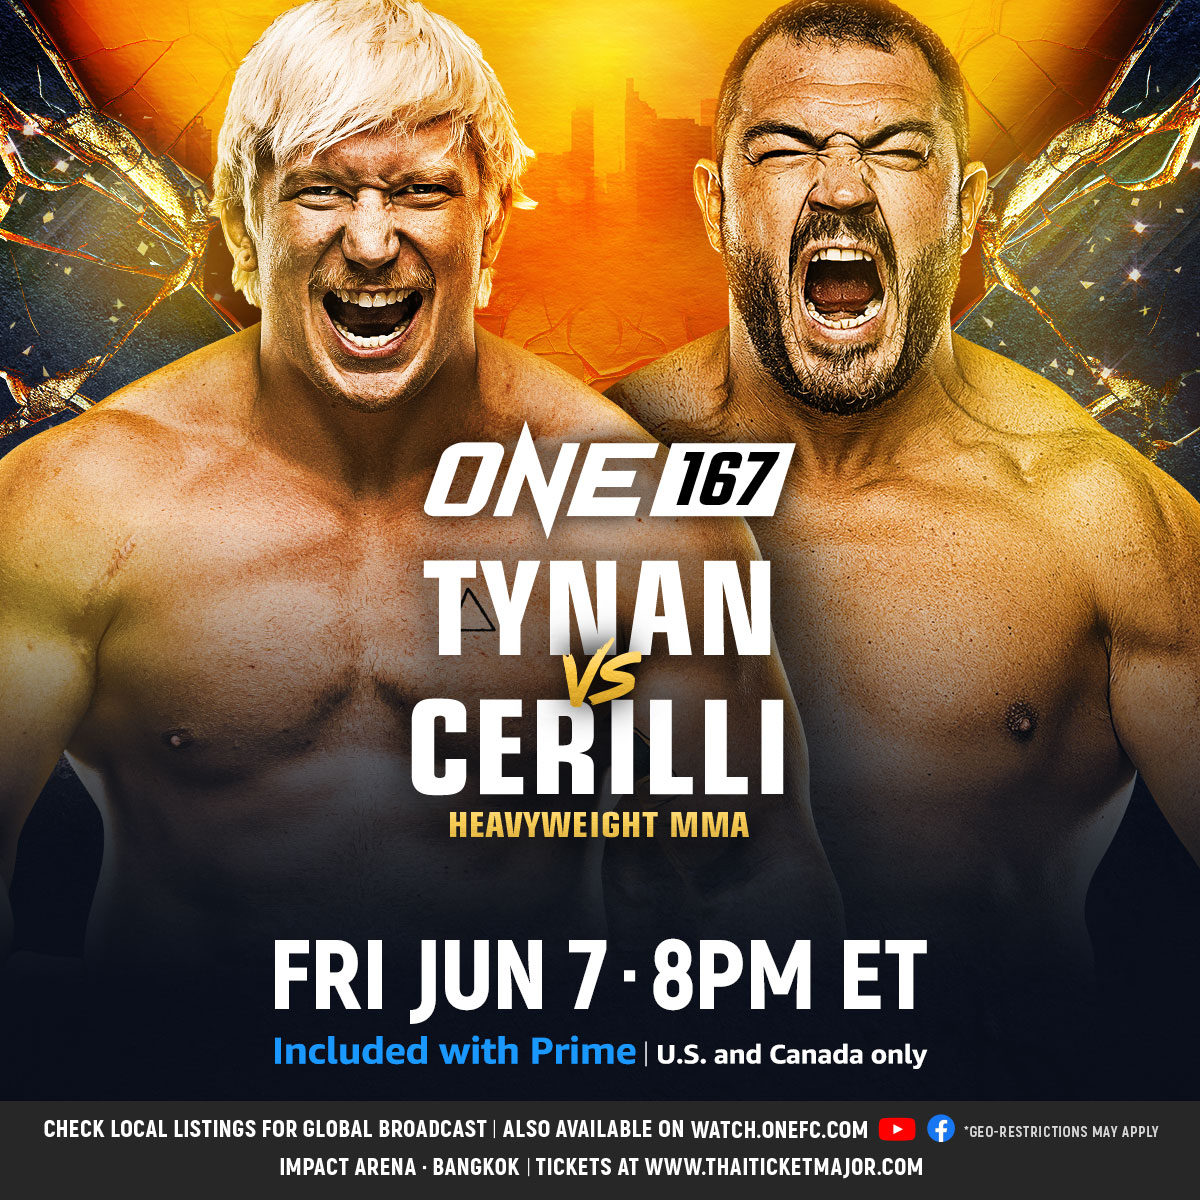 Heavyweight giants collide 👊 Canadian breakout star Ben Tynan and Italian bruiser Mauro Cerilli are set to throw down at ONE 167 on Prime Video! Who leaves Bangkok with the W? #ONE167 | Jun 7 at 8PM ET ⁠ 🇺🇸🇨🇦 Watch Live on Prime ⁠ 🇬🇧🇮🇪 Watch Live on Sky Sports ⁠ 🌍 Live TV